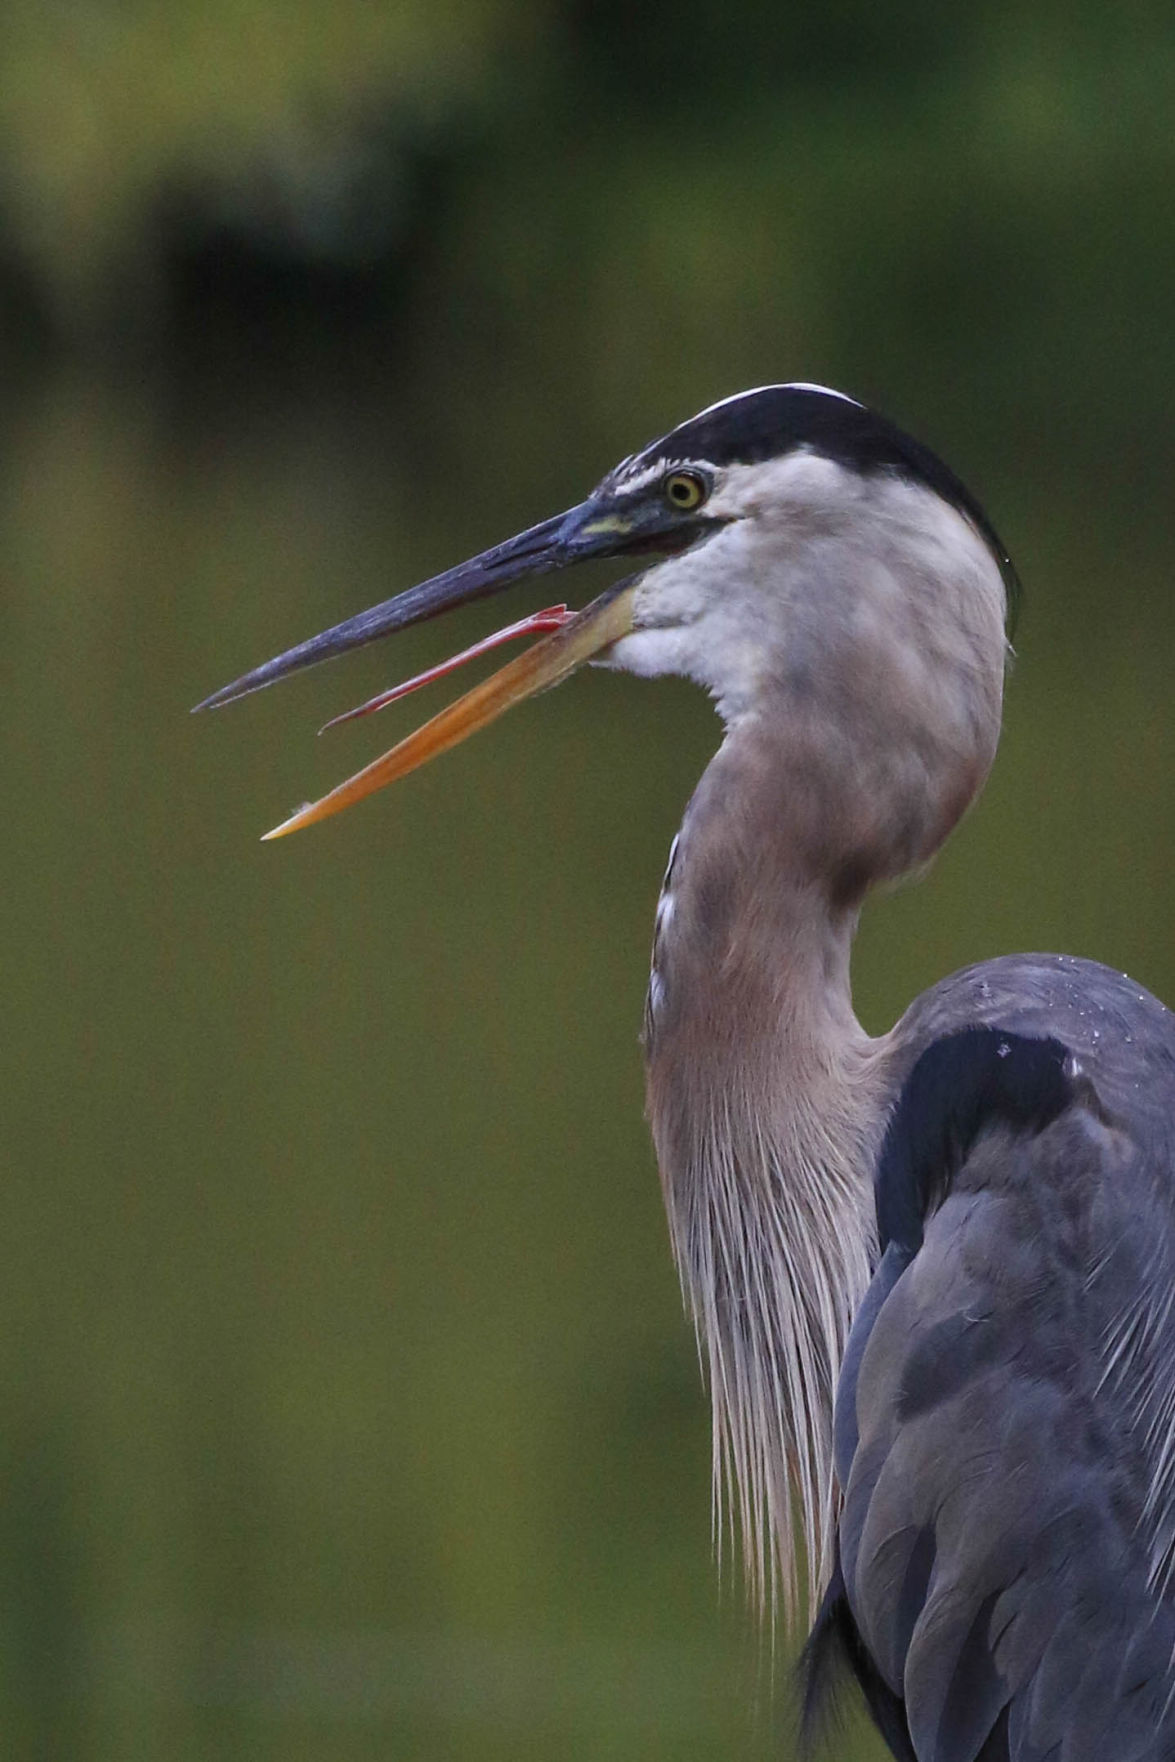 Hot today? The great blue heron does a little gular fluttering ...